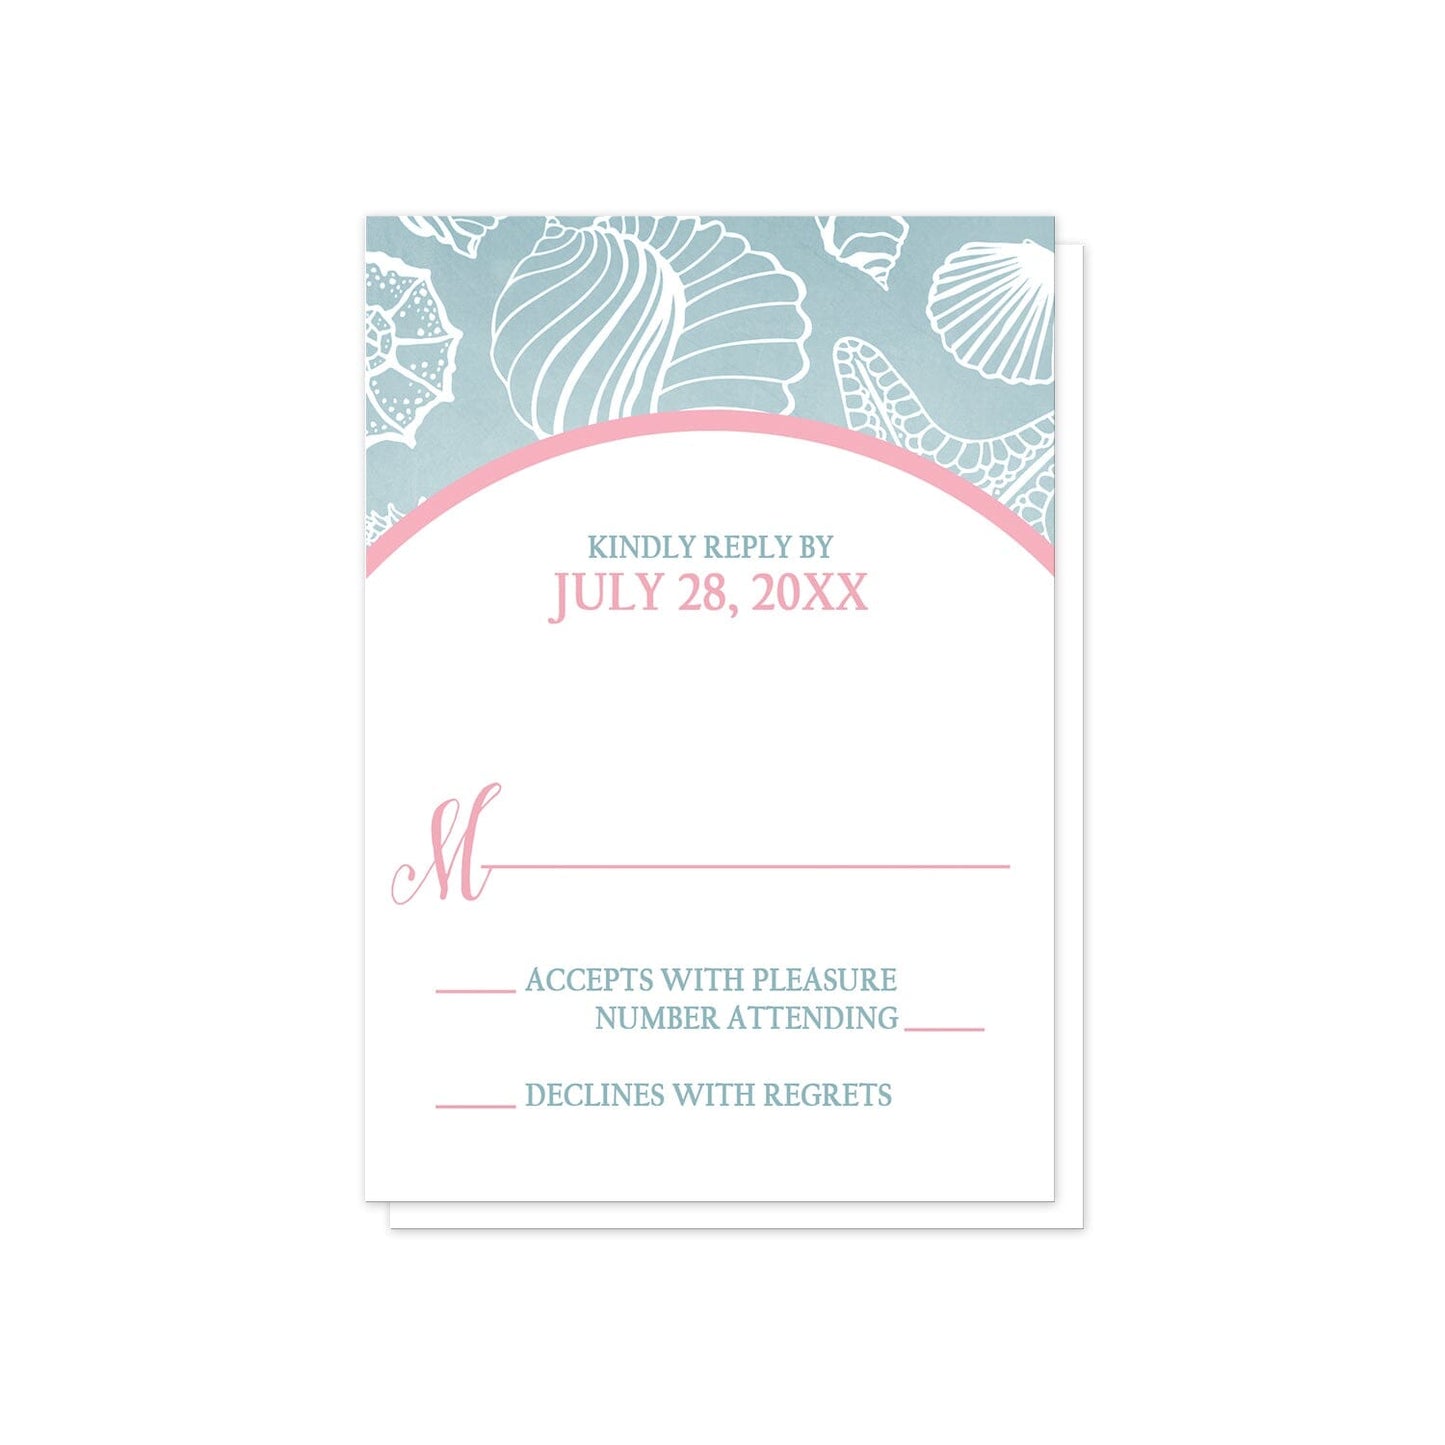 Blue Seashell Pink Beach RSVP Cards at Artistically Invited.